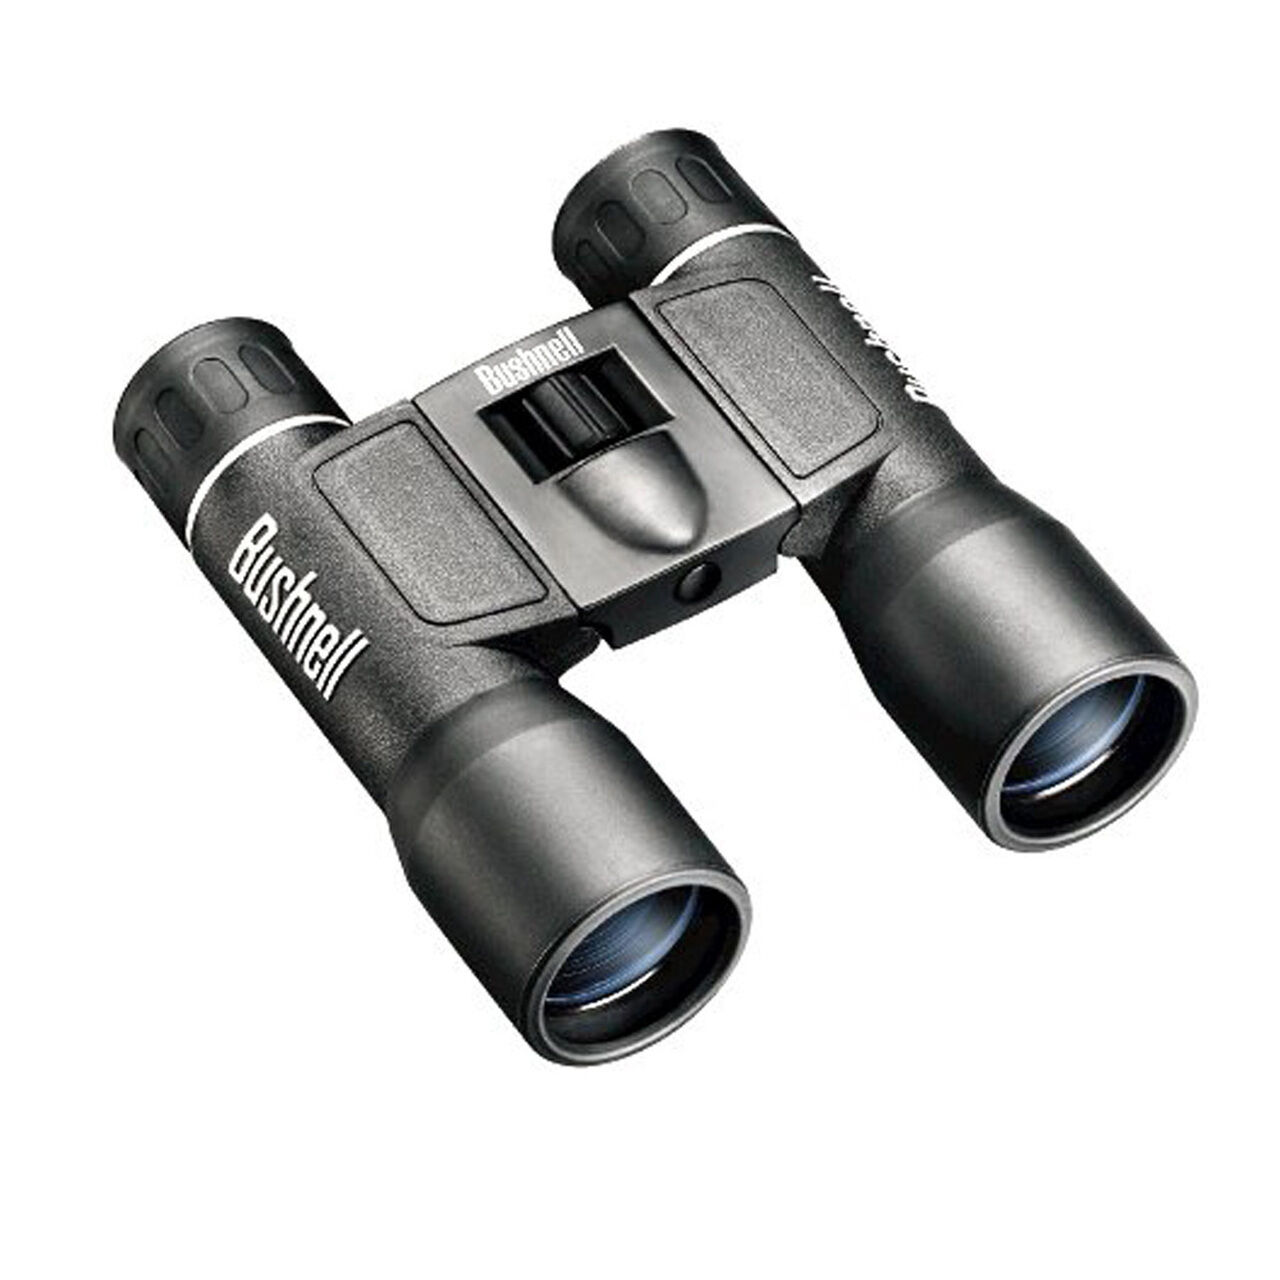 Buy Powerview Binoculars and More. Shop Today For All of Your 